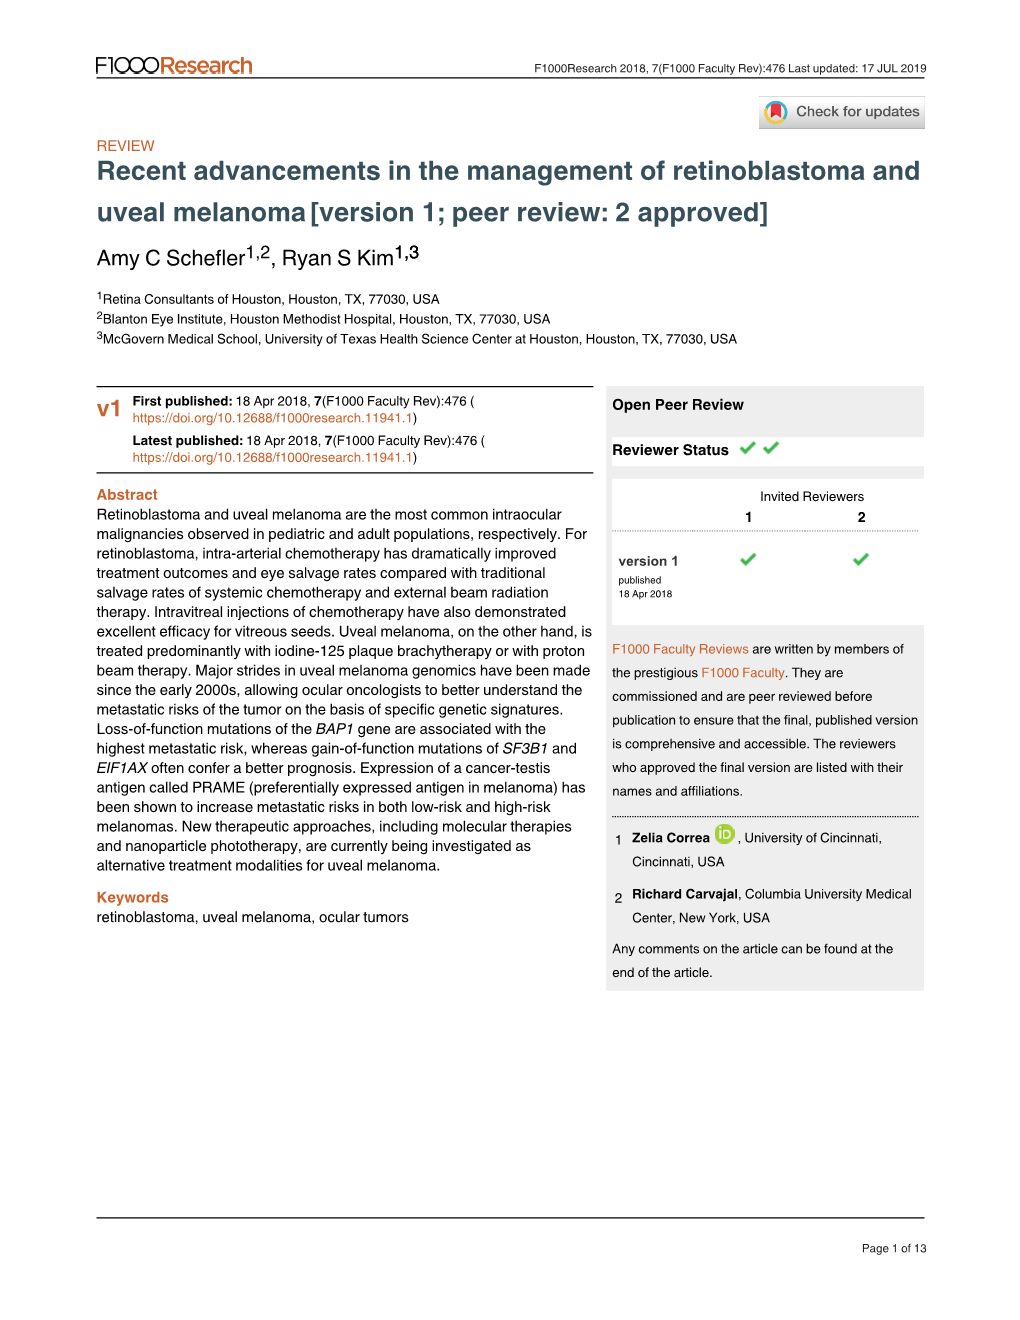 Recent Advancements in the Management of Retinoblastoma and Uveal Melanoma [Version 1; Peer Review: 2 Approved] Amy C Schefler1,2, Ryan S Kim1,3